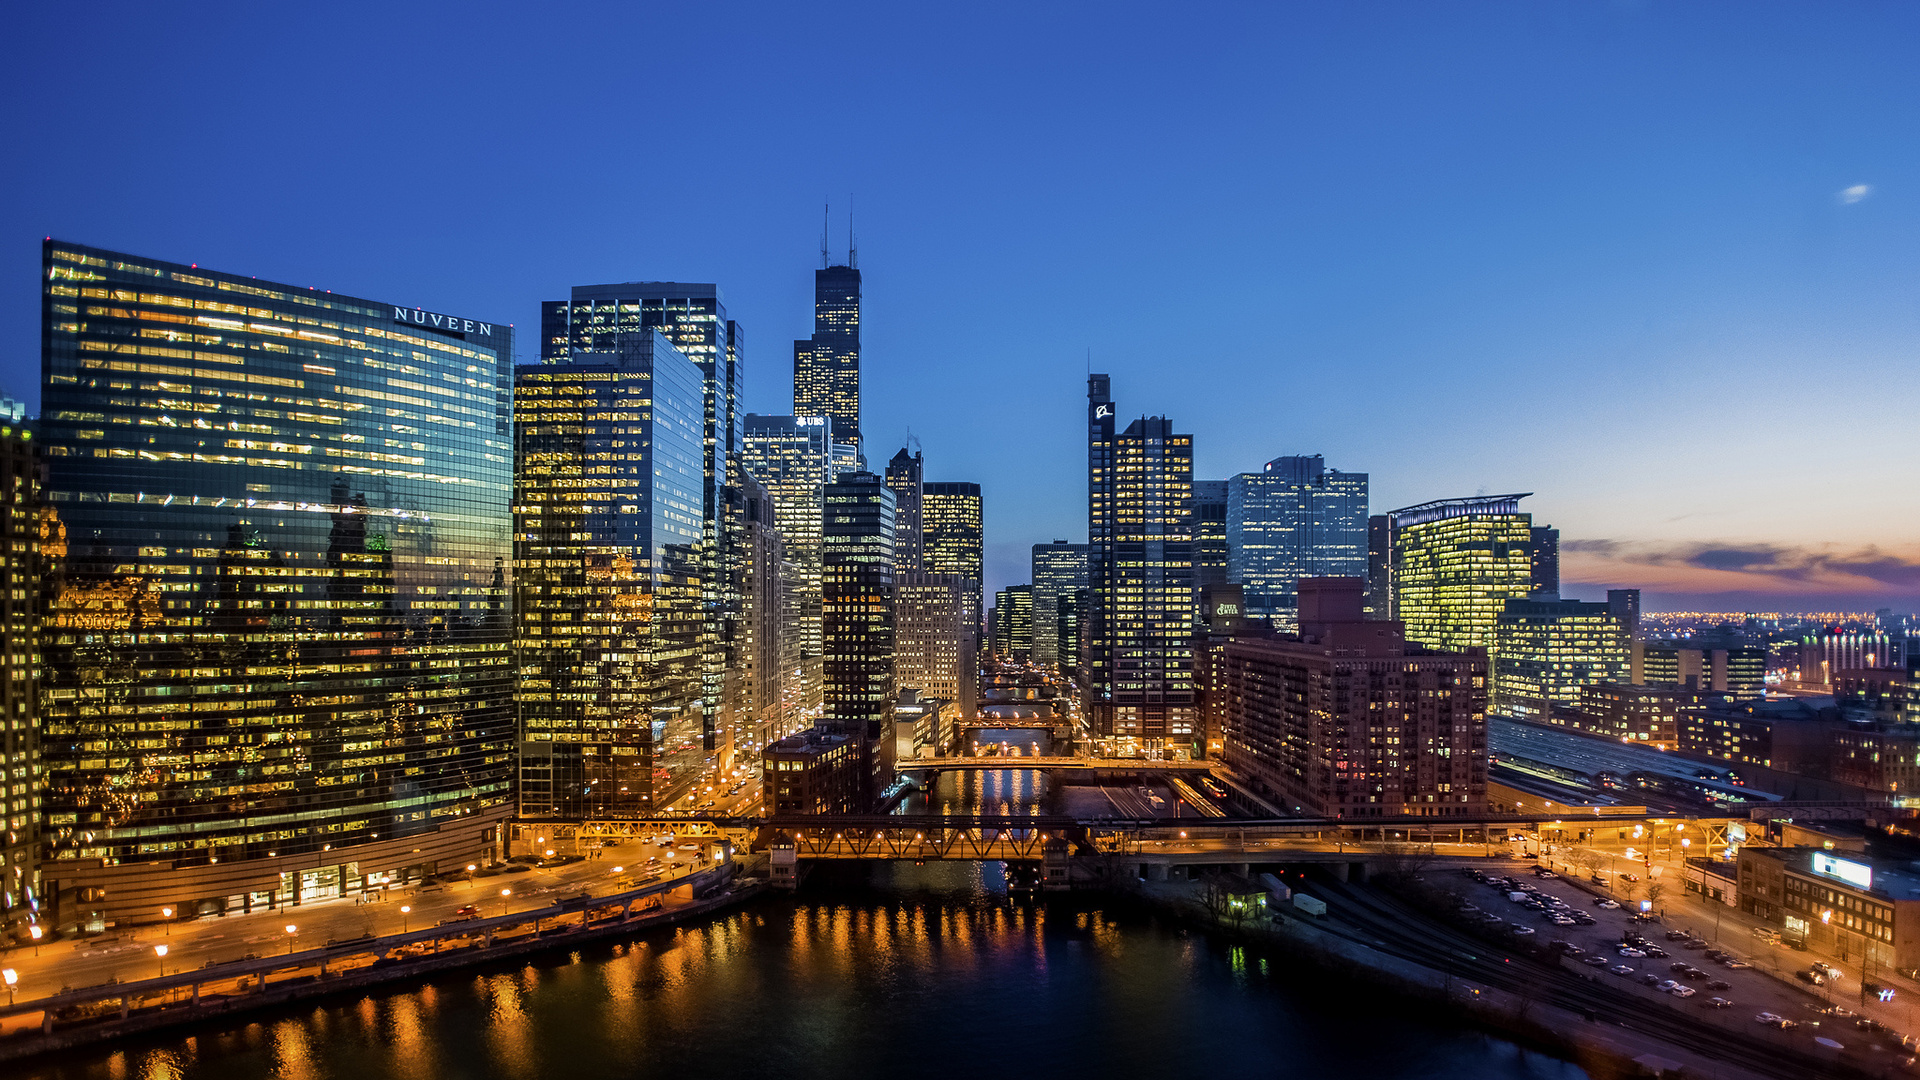 chicago, World, Cities, Architecture, Buildings, Skyscrapers, Wondow, Lights, Night, Hdr, Marina, Harbor, Water, Reflection, Sky, Sunset, Sunrise Wallpaper